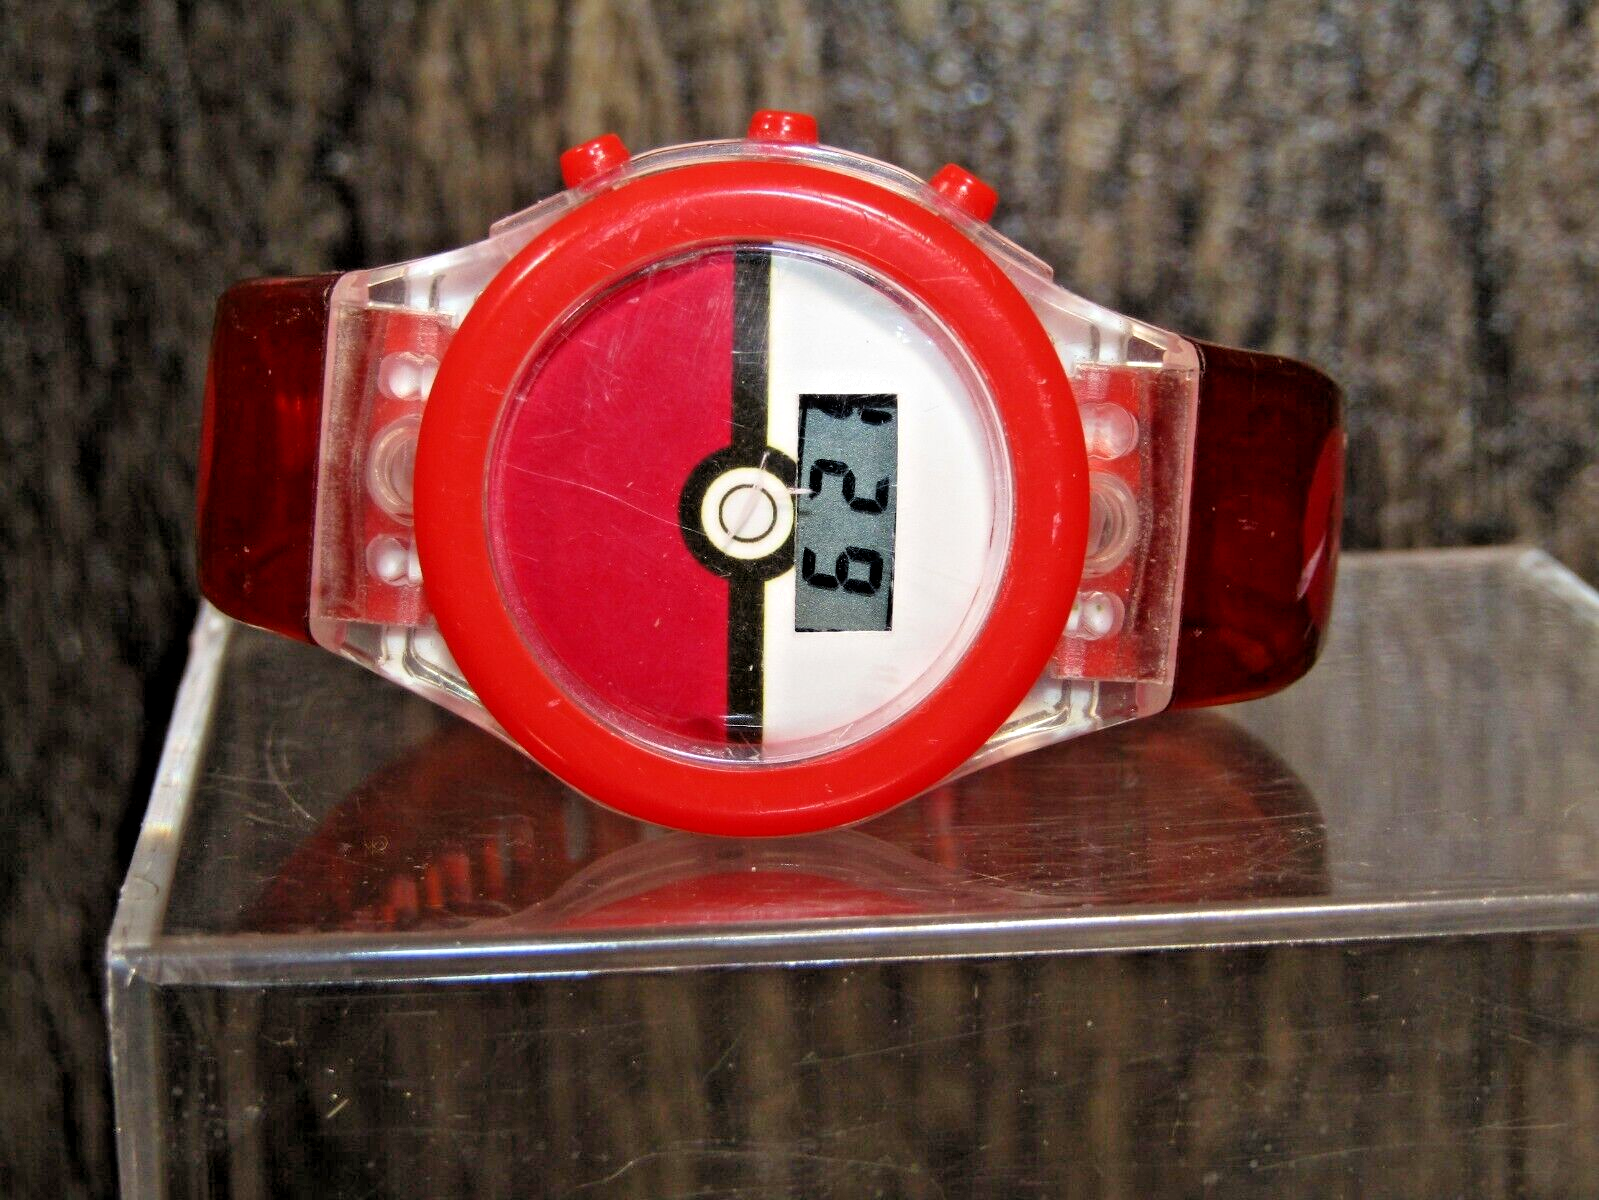 Primary image for 2016 Pokemon PokeBall Accutime Digital Light Up Watch Red Nintendo Tested